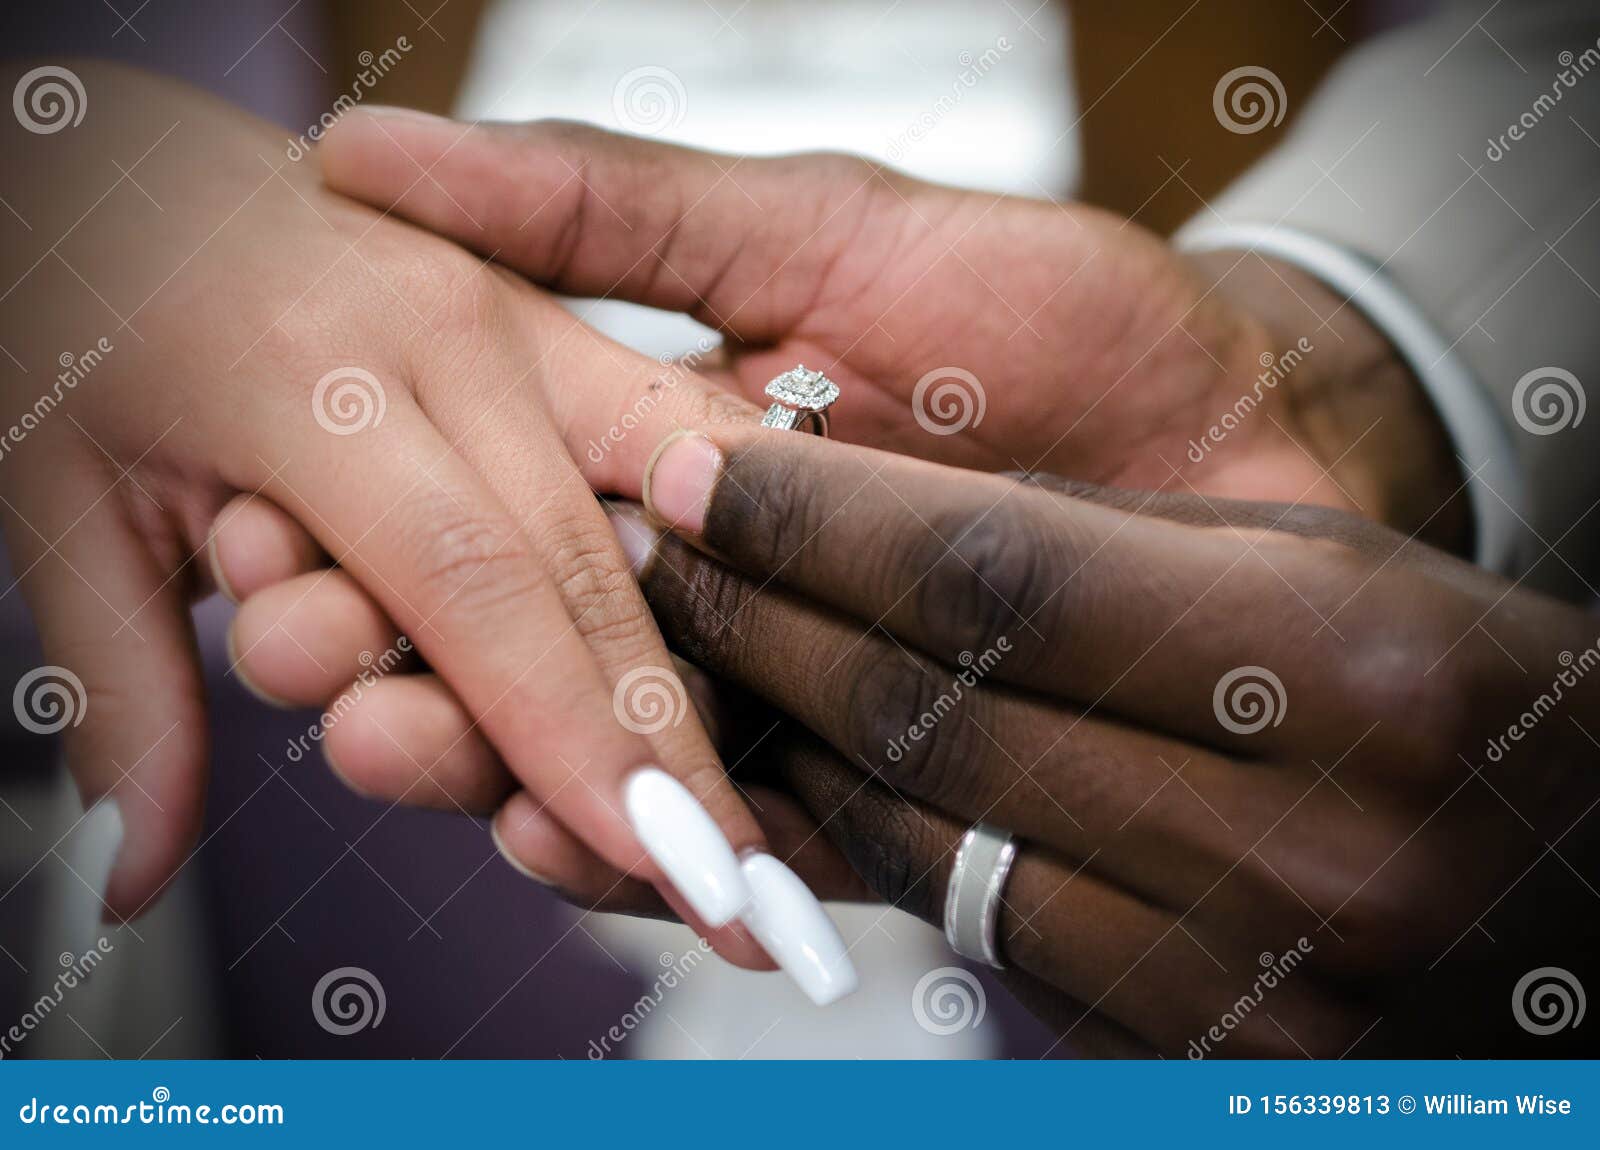 interracial couple exchanging wedding rings at marriage ceremony